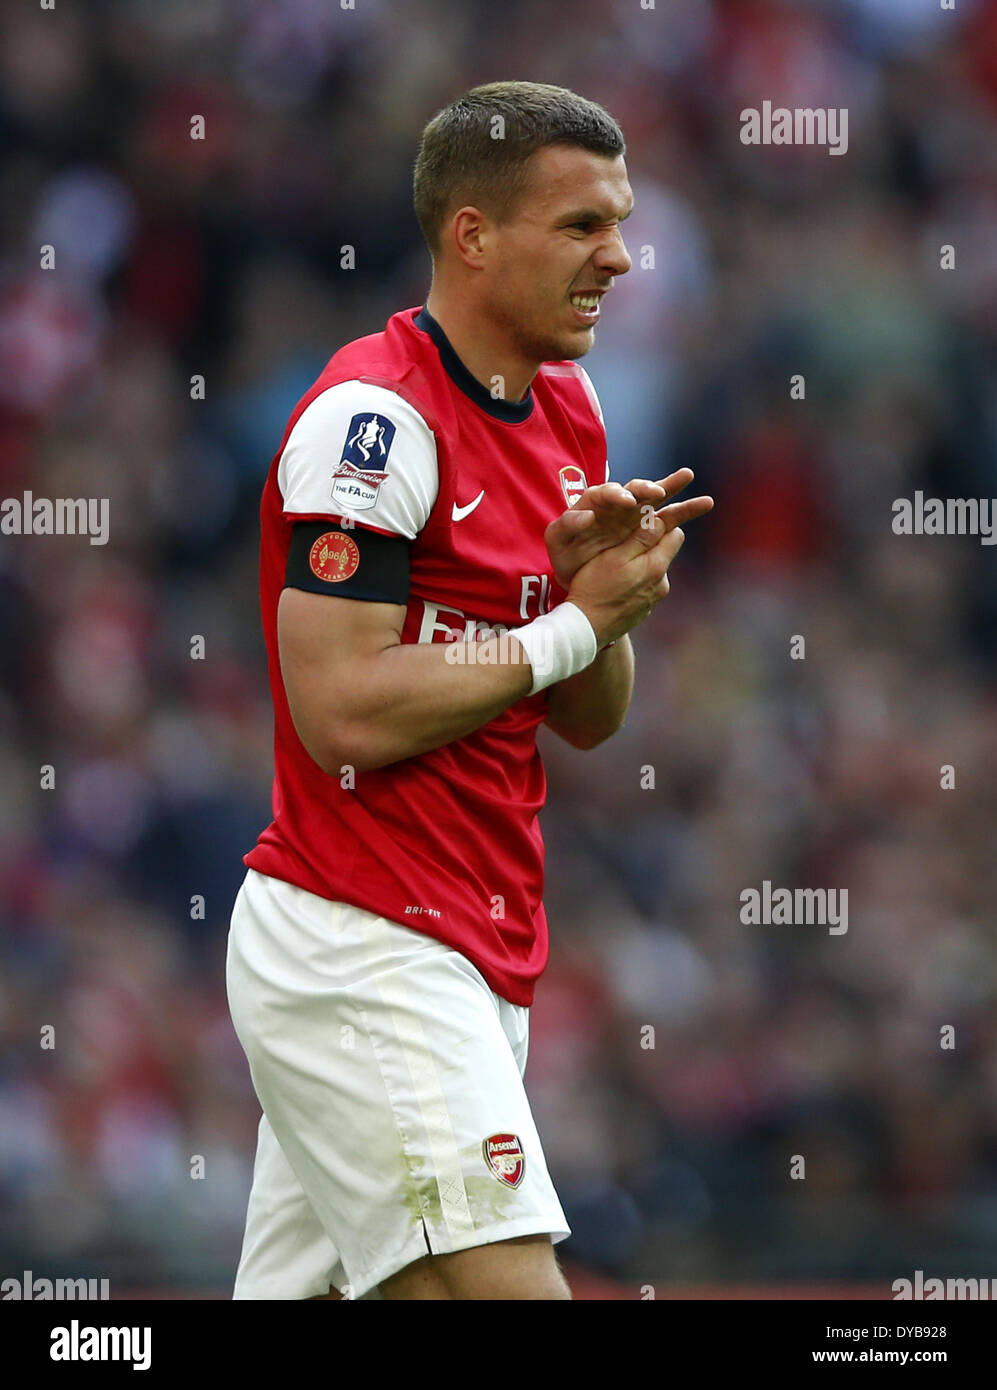 London, Britain. 12th Apr, 2014. Lukas Podolski of Arsenal reacts after injury during FA Cup semifinal match between Arsenal and Wigan Athletic at Wembley Stadium in London, Britain, on April 12, 2014. Arsenal advanced to the final with winning 4-2 on penalties after a 1-1 draw. © Wang Lili/Xinhua/Alamy Live News Stock Photo